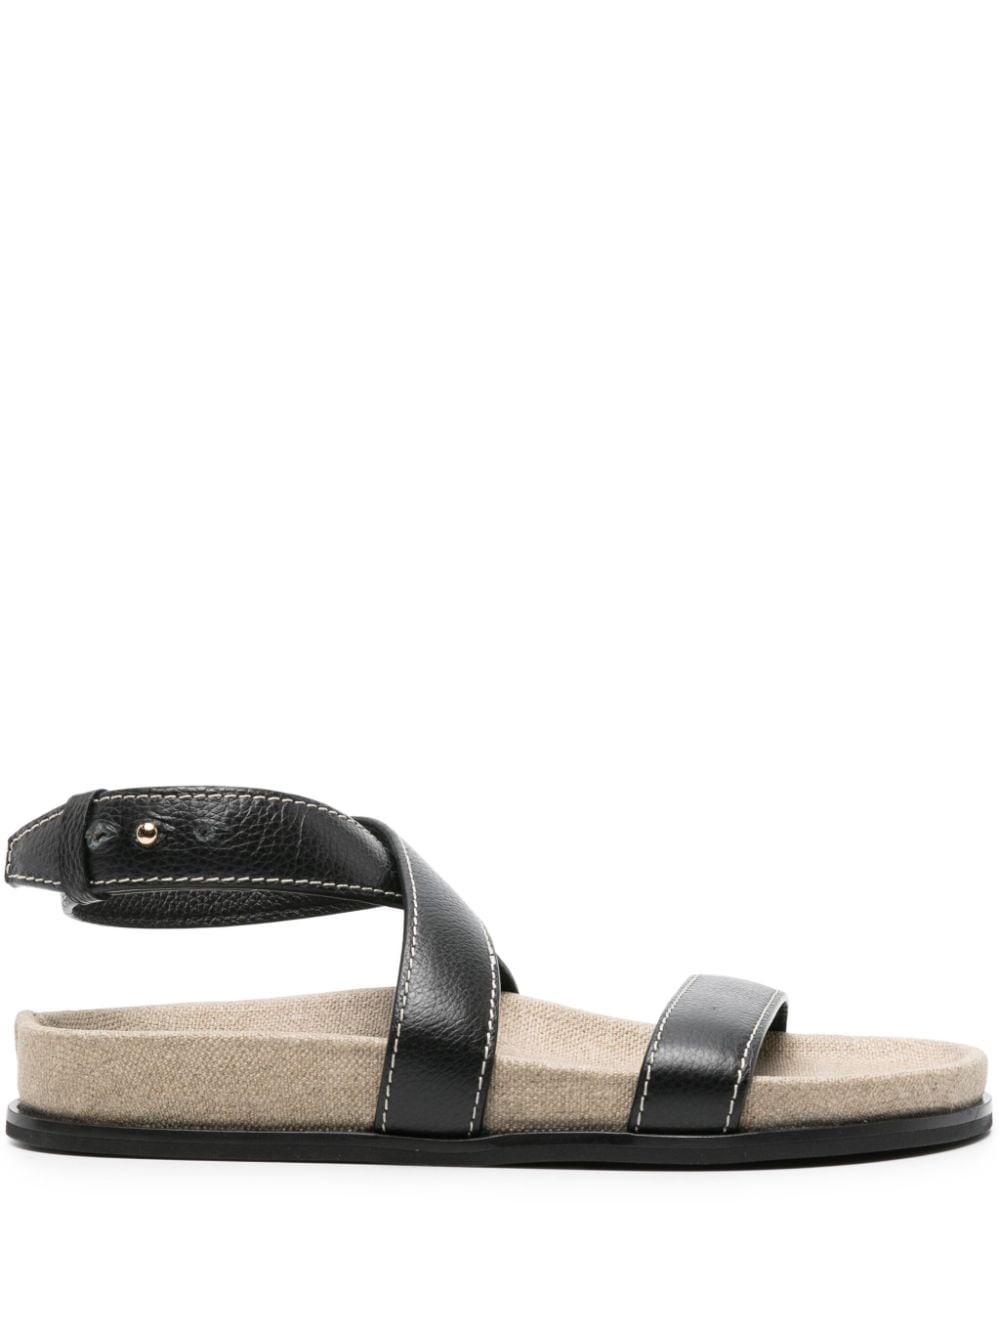 TOTEME The Chunky leather sandals - Black von TOTEME